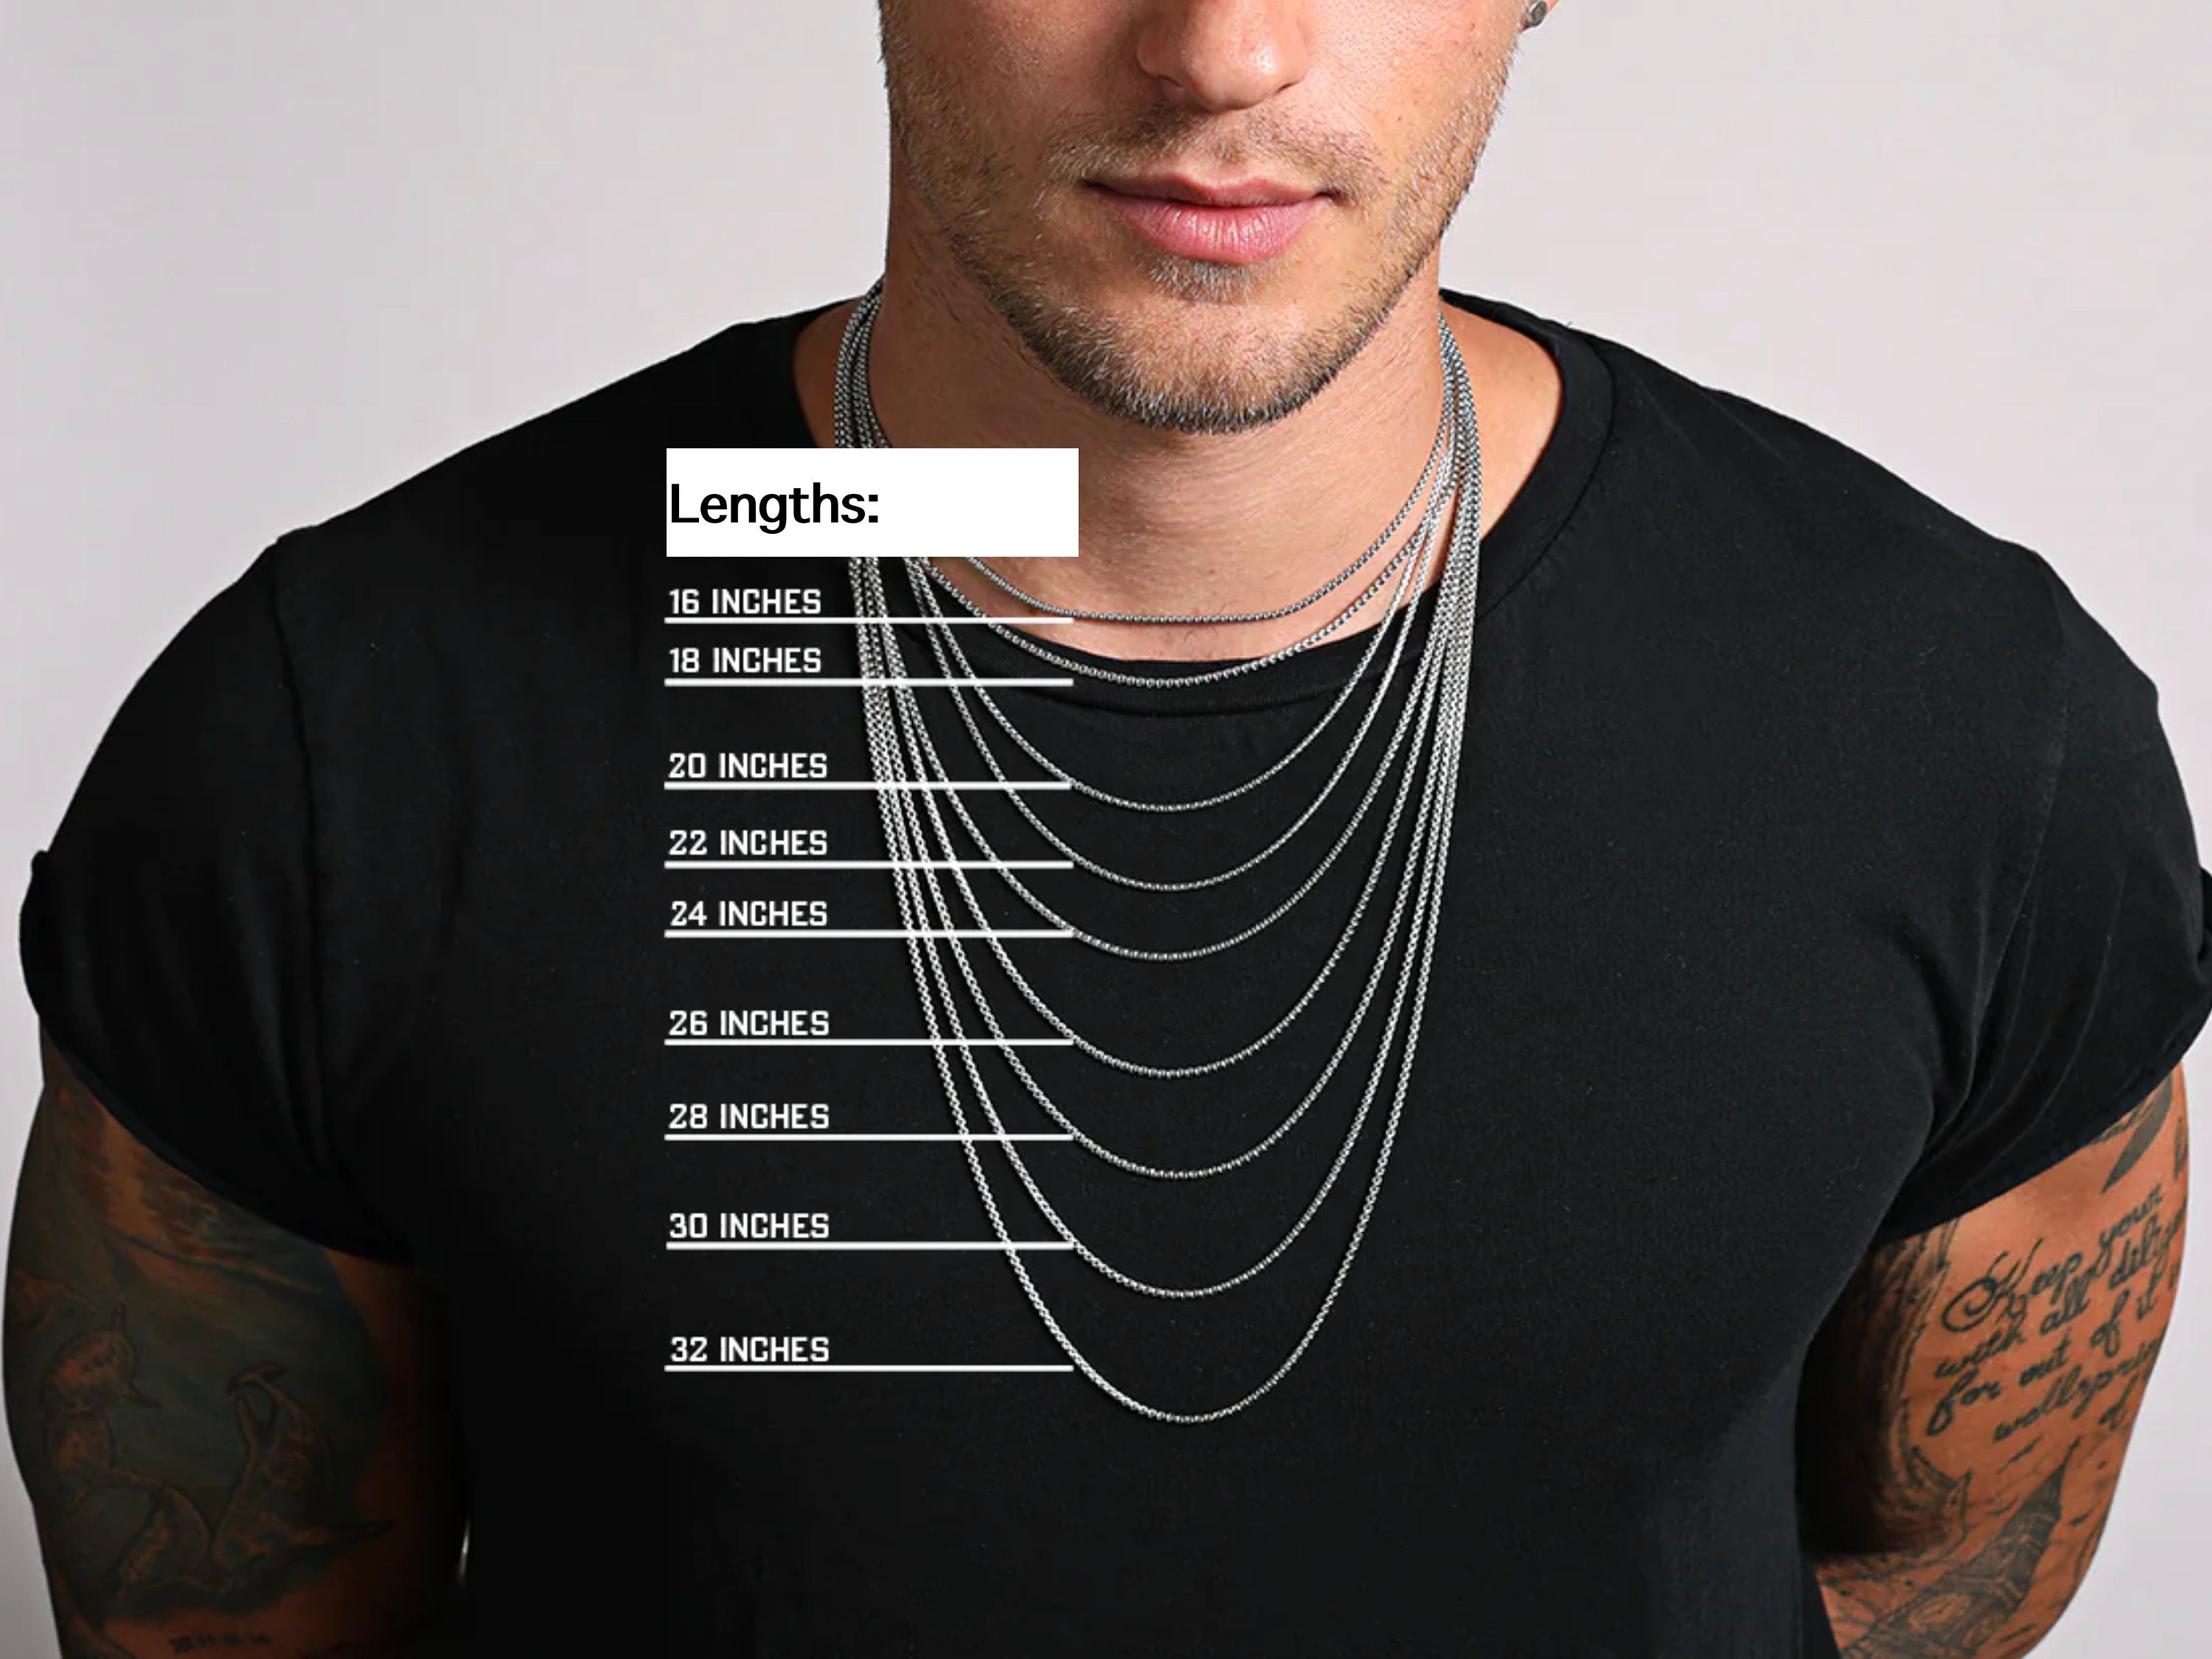 Cuban Link Chain for Men 11mm 16 Inches Stainless Steel Boys Chain Chunky Necklaces  Mens Jewelry | Amazon.com